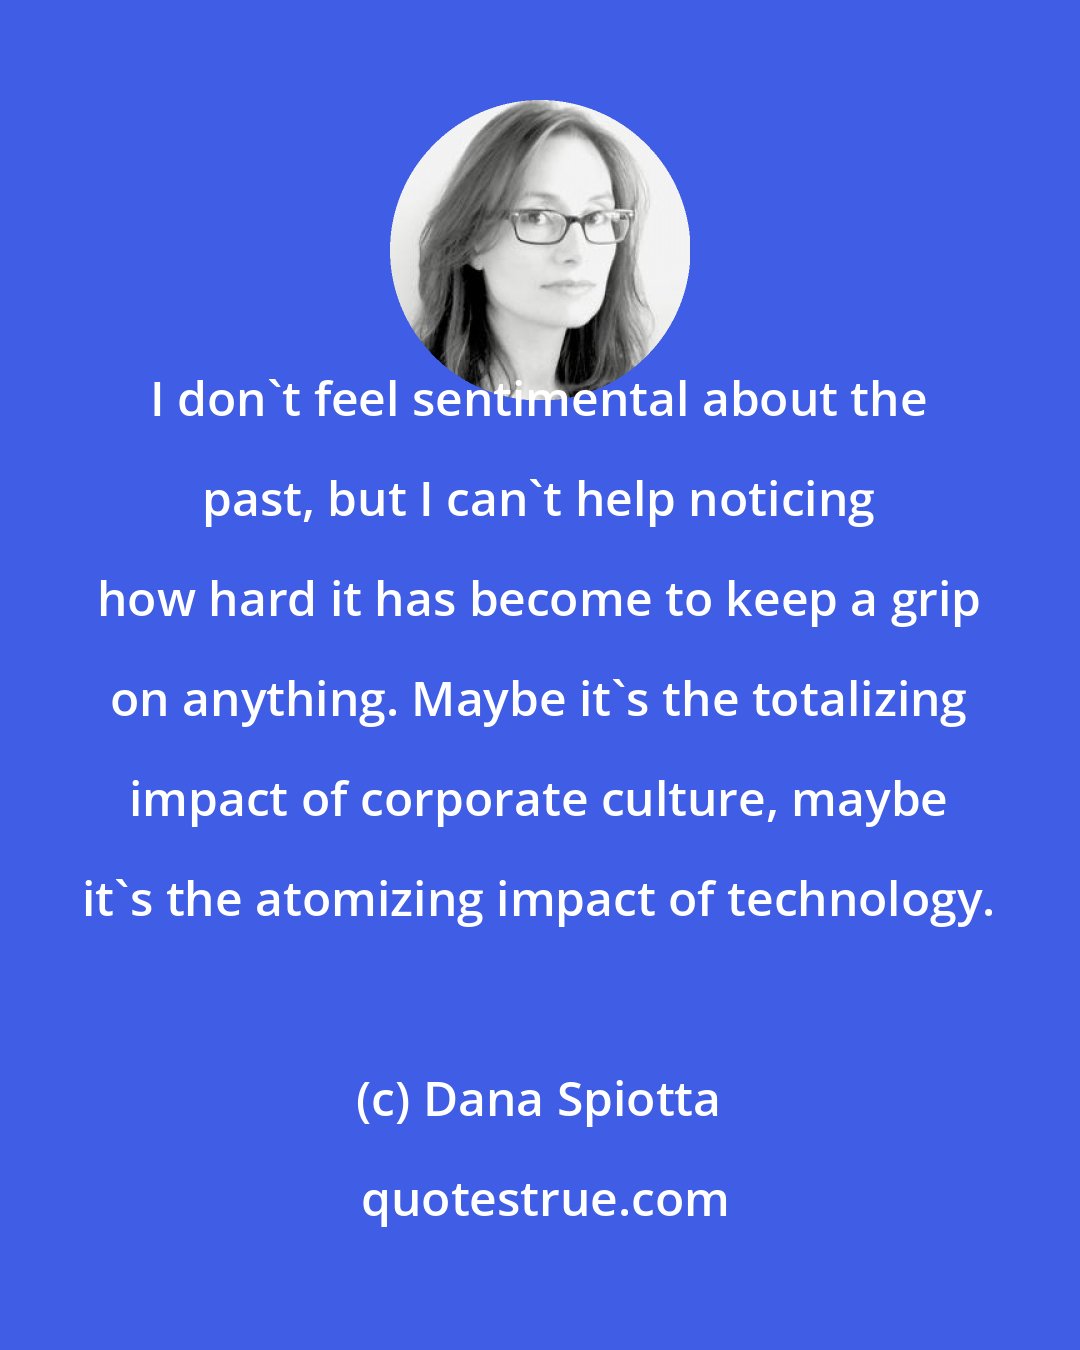 Dana Spiotta: I don't feel sentimental about the past, but I can't help noticing how hard it has become to keep a grip on anything. Maybe it's the totalizing impact of corporate culture, maybe it's the atomizing impact of technology.